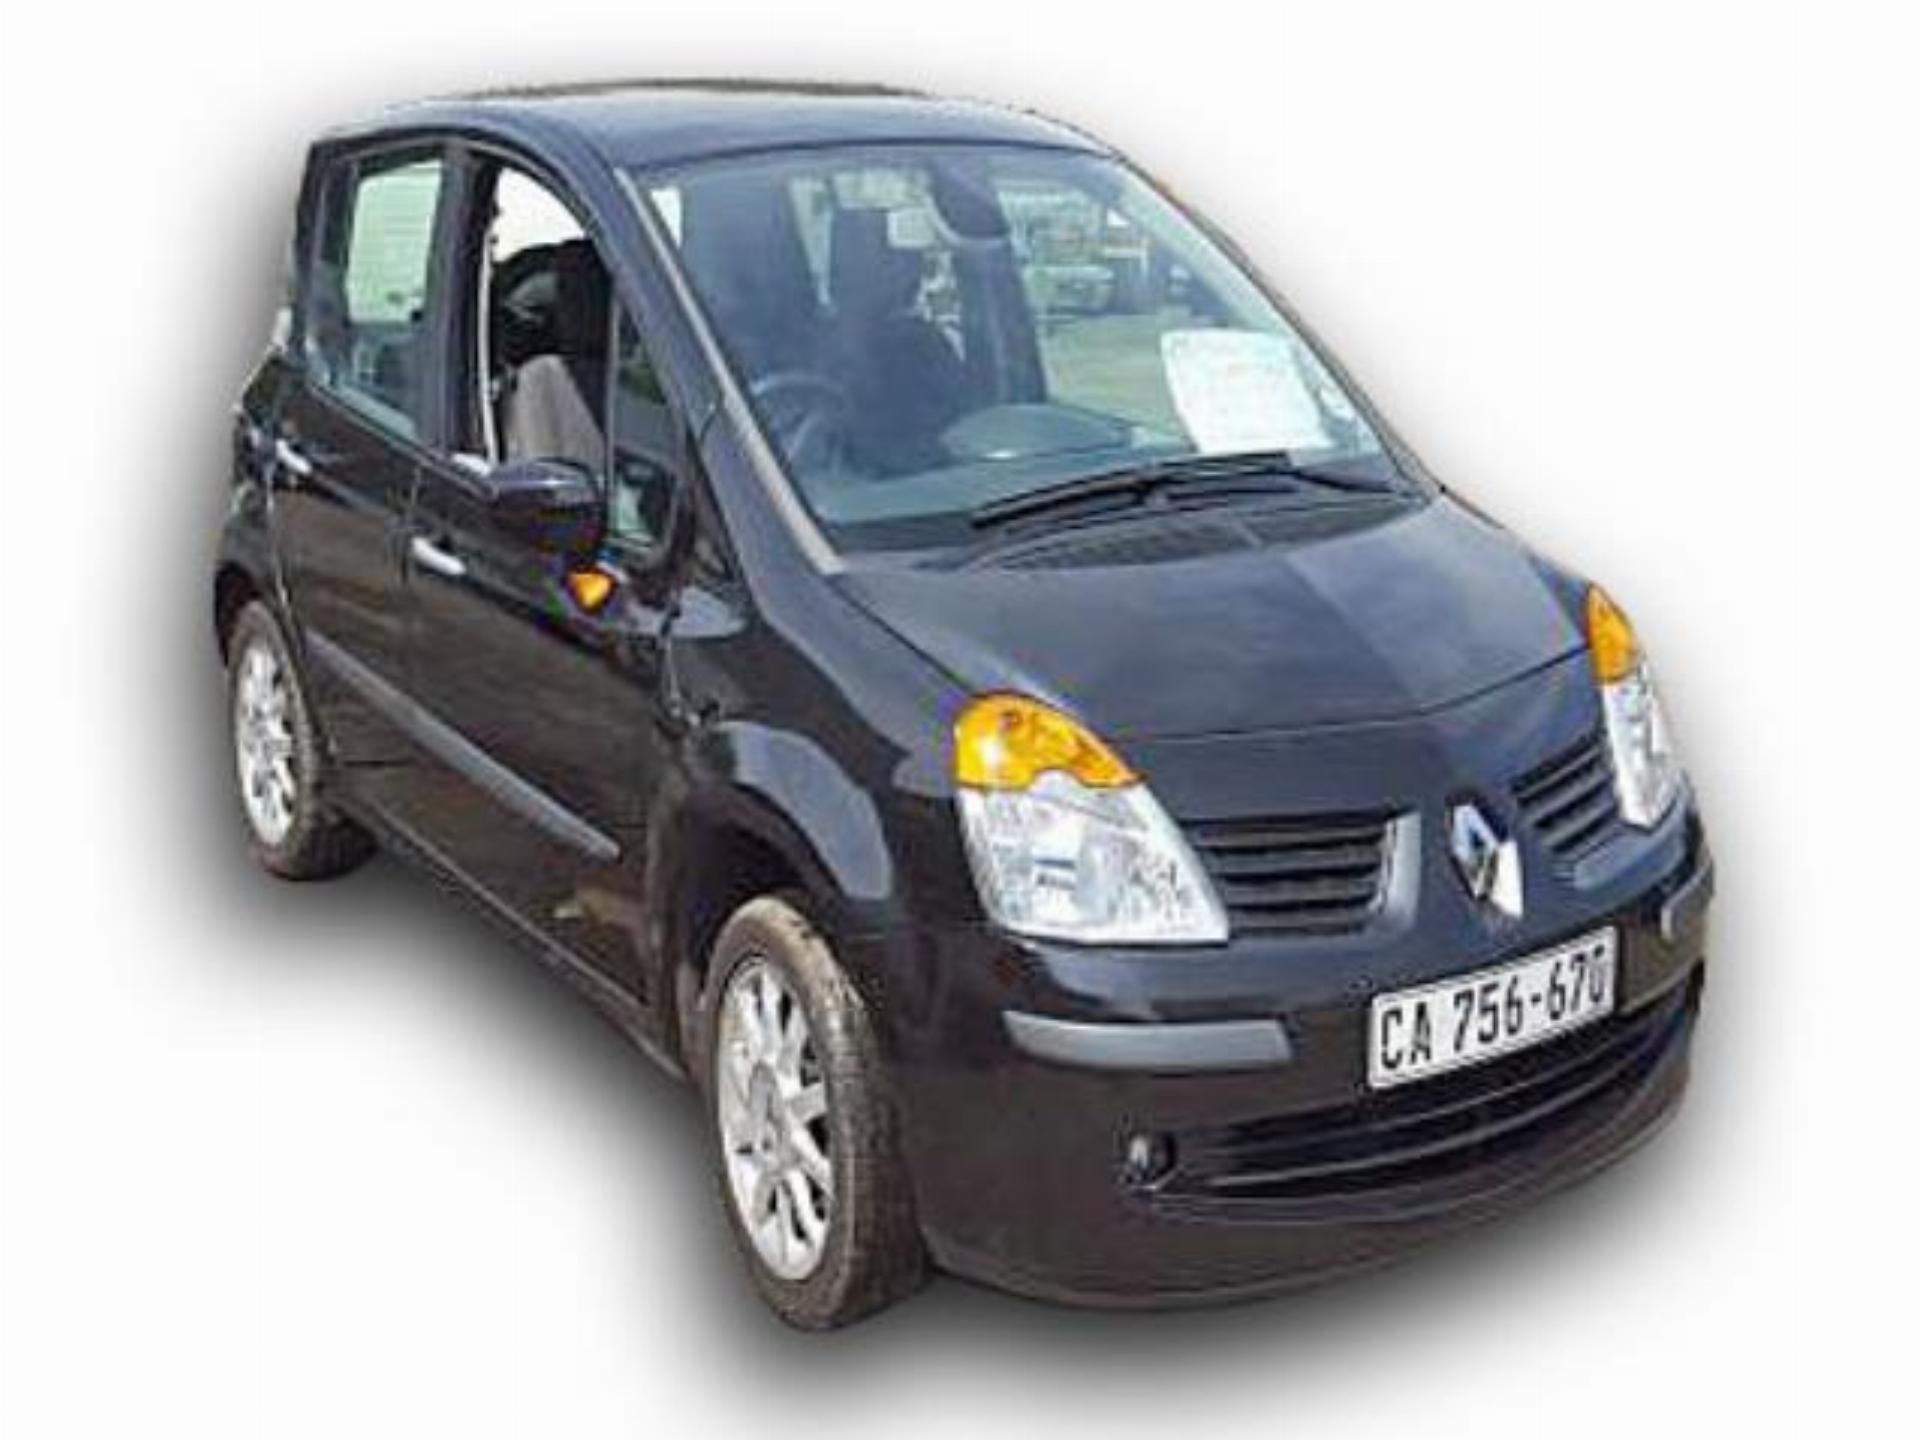 Used Renault Modus 1.4 Dynamique 2005 on auction PV1014792